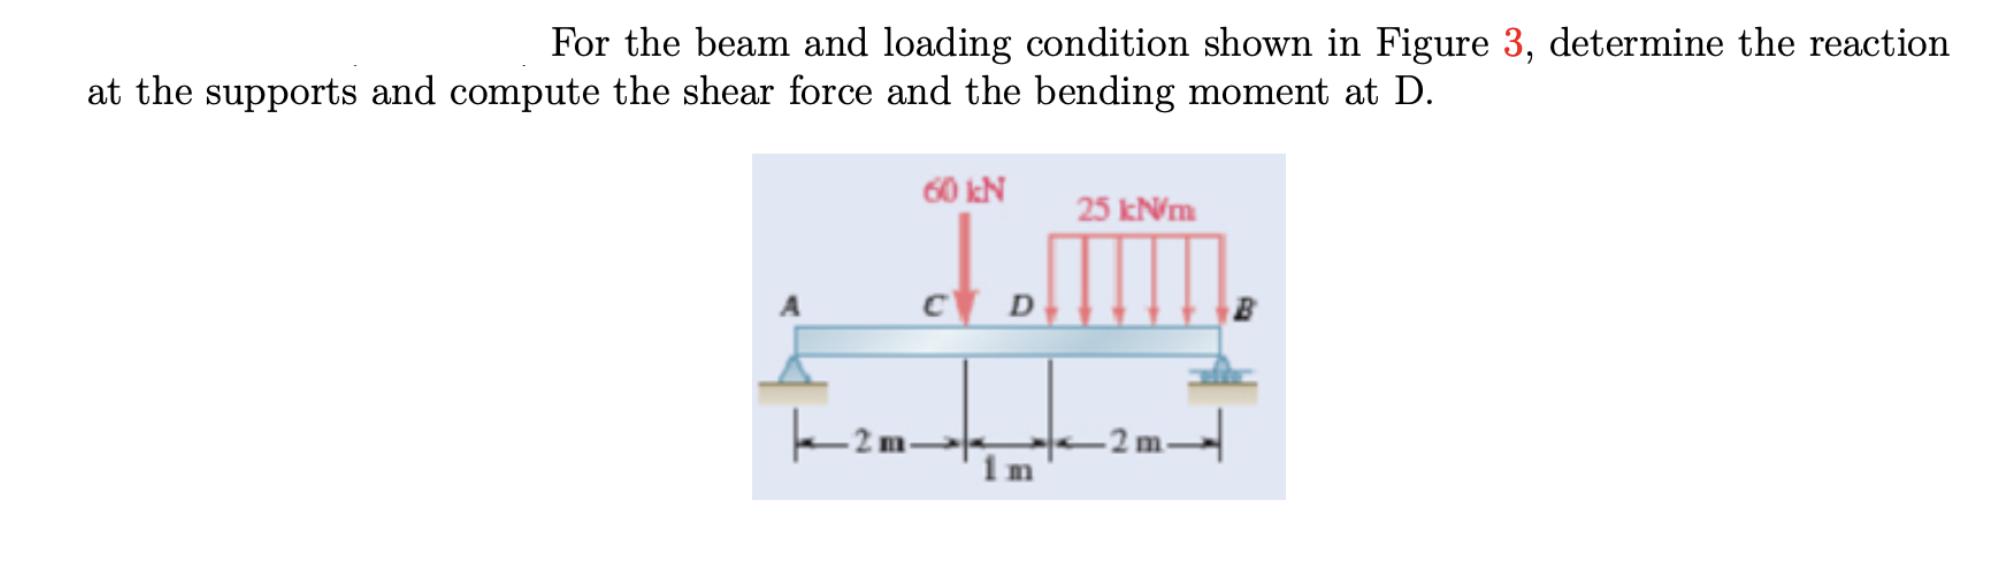 For the beam and loading condition shown in Figure 3, determine the reaction at the supports and compute the